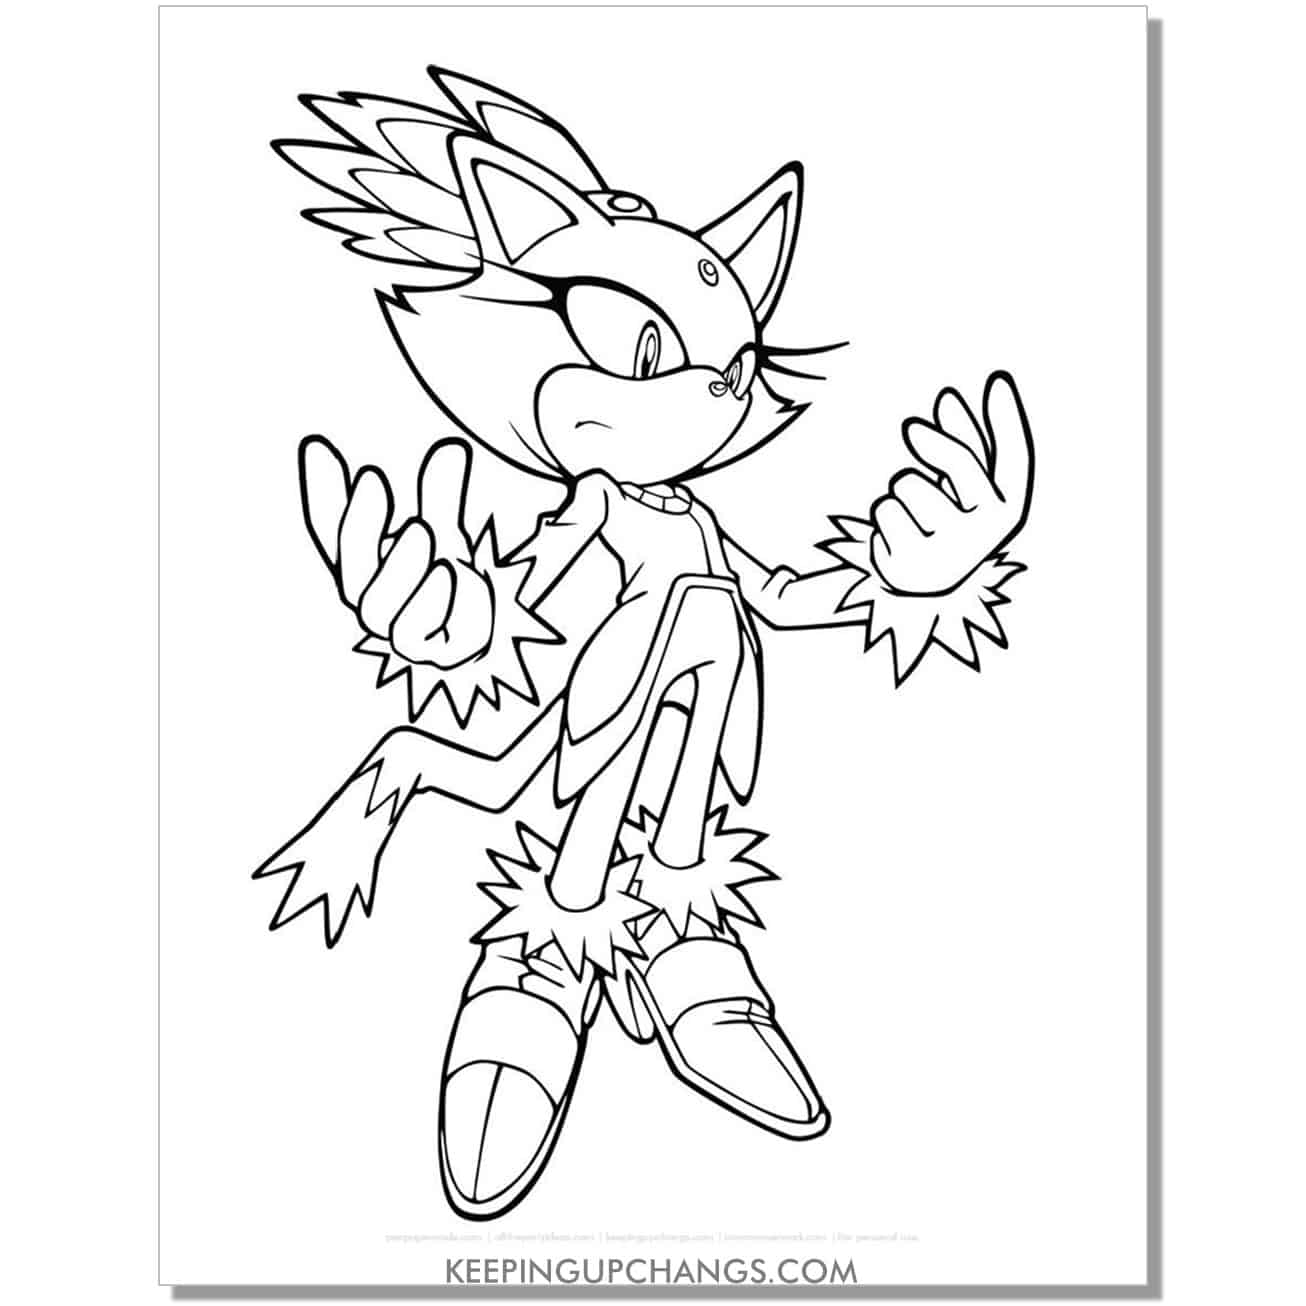 blaze cat opening fists into palms sonic coloring page.